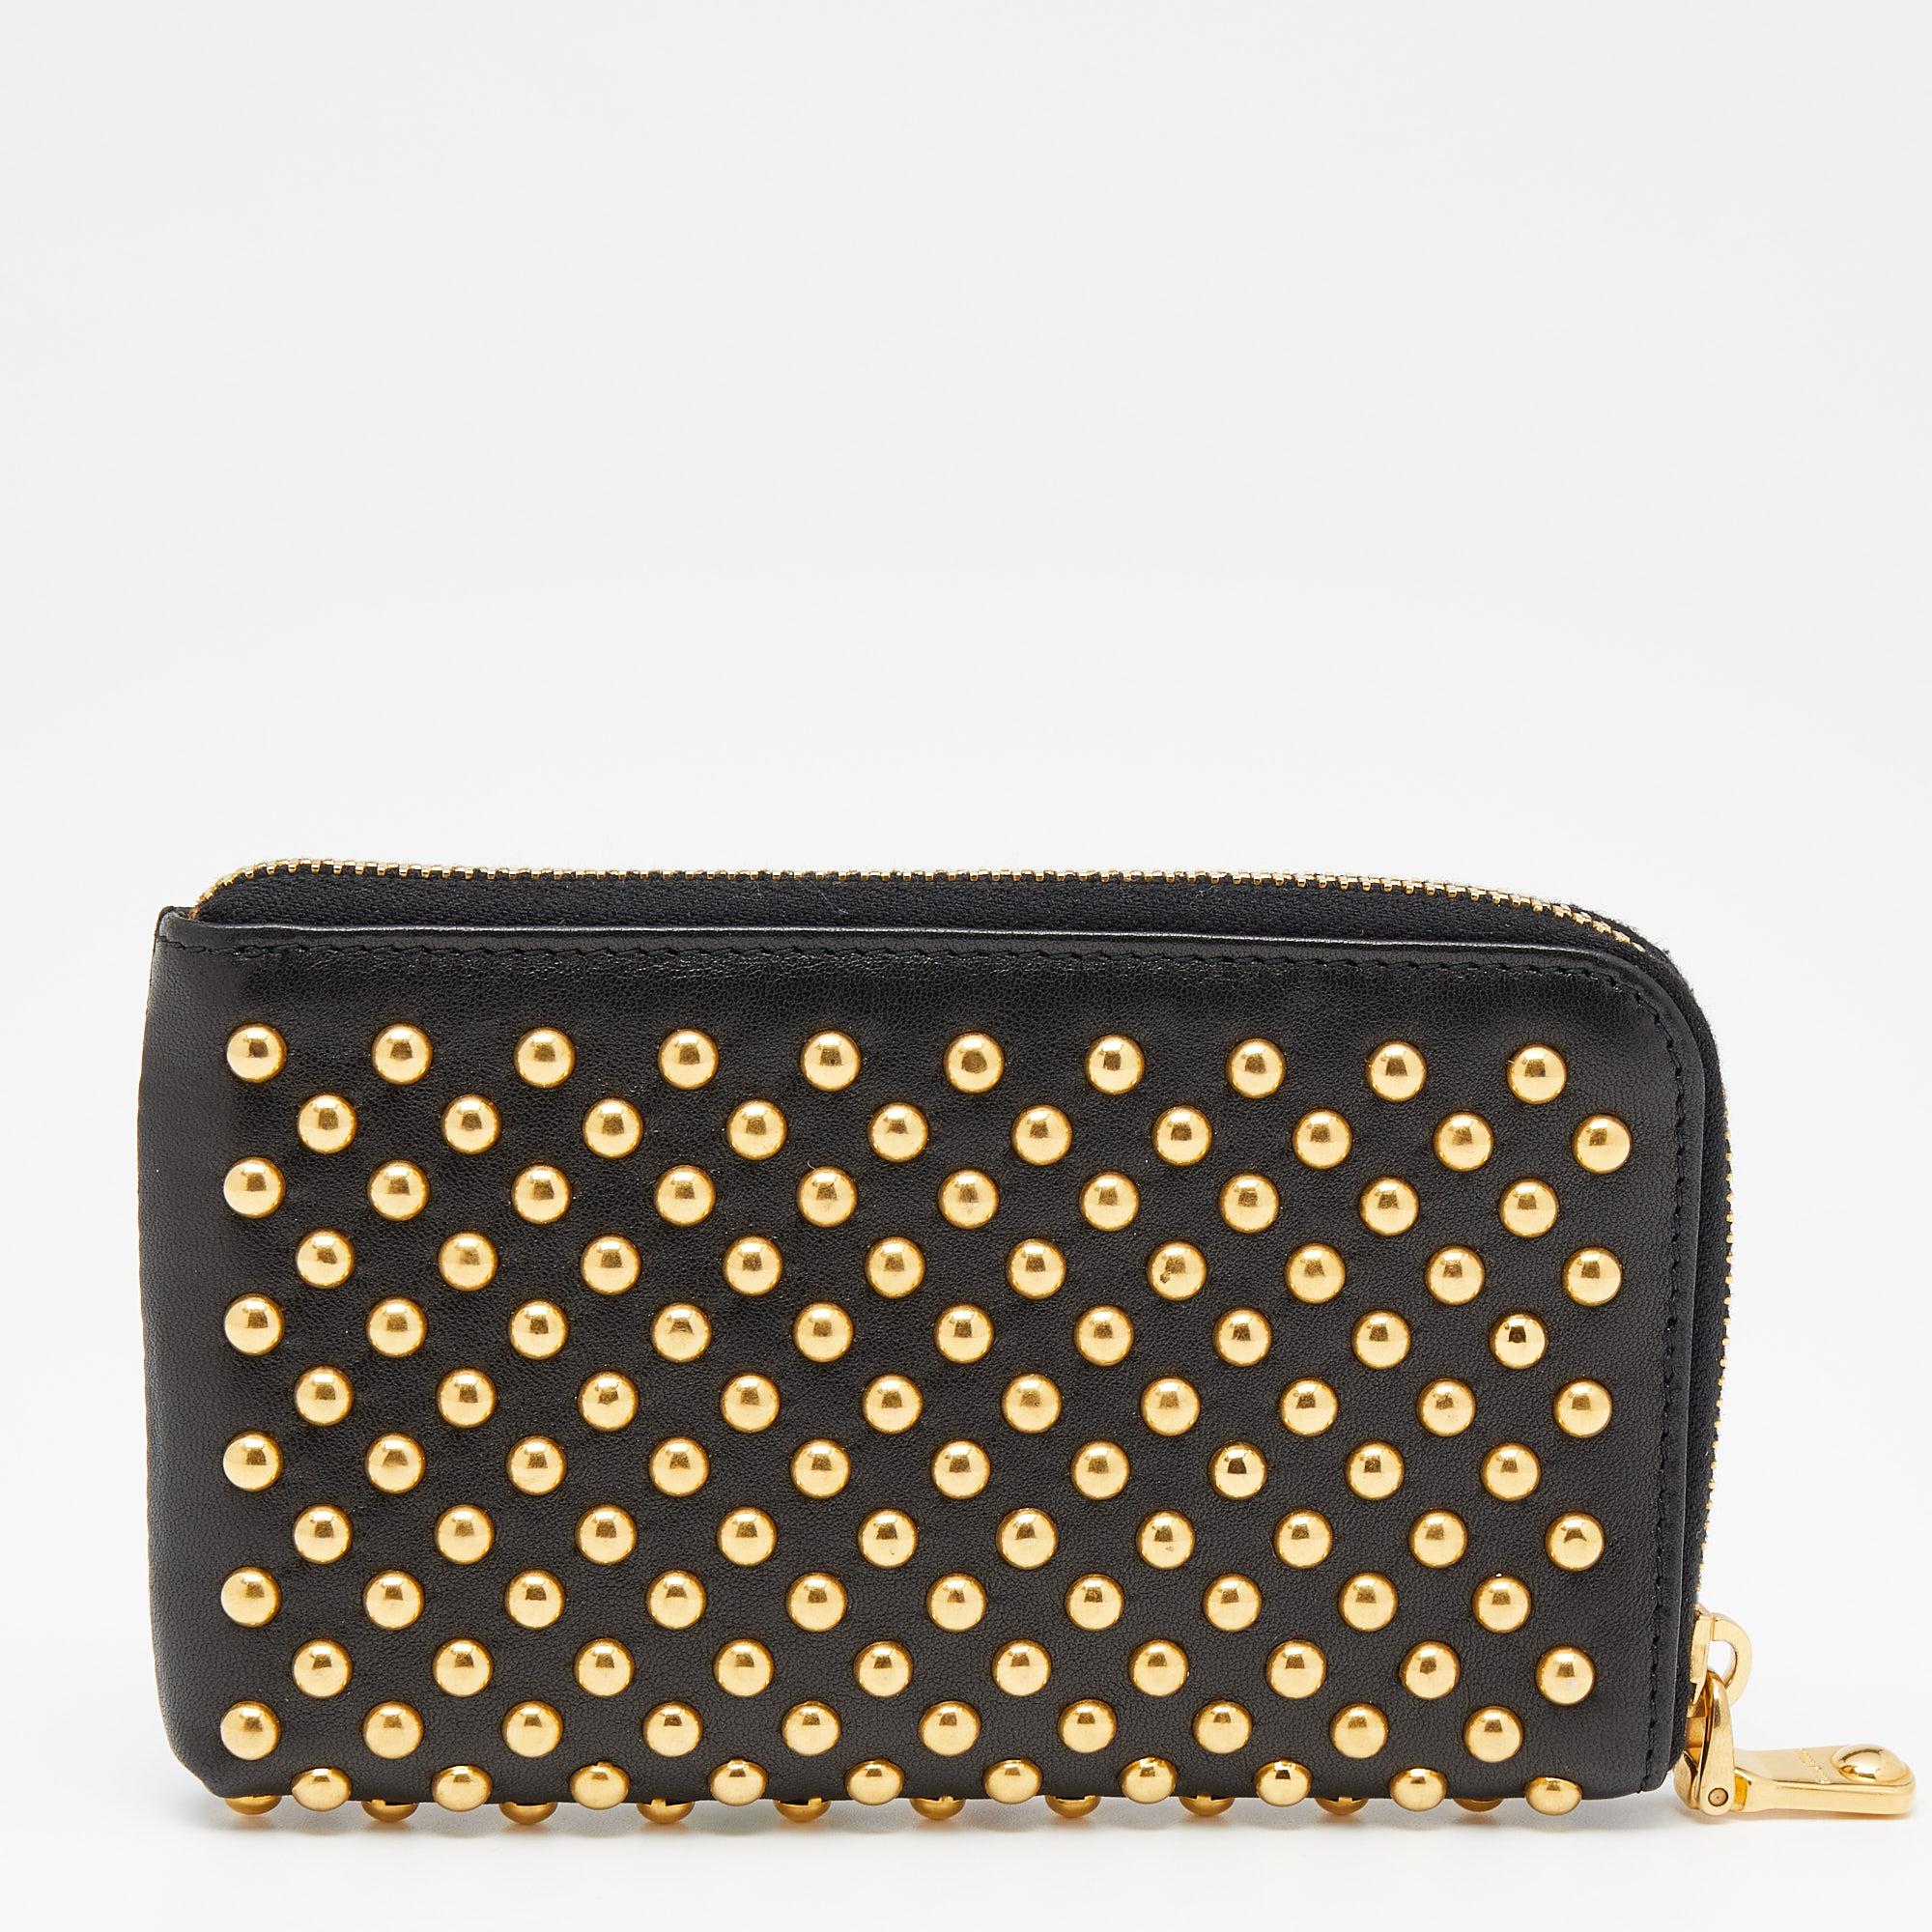 Give your essentials a stylish home with this studded wallet from the house of Miu Miu. Durable and long-lasting, this wallet is crafted from leather. A classic black shade and a zip closure characterize this fine wallet.

